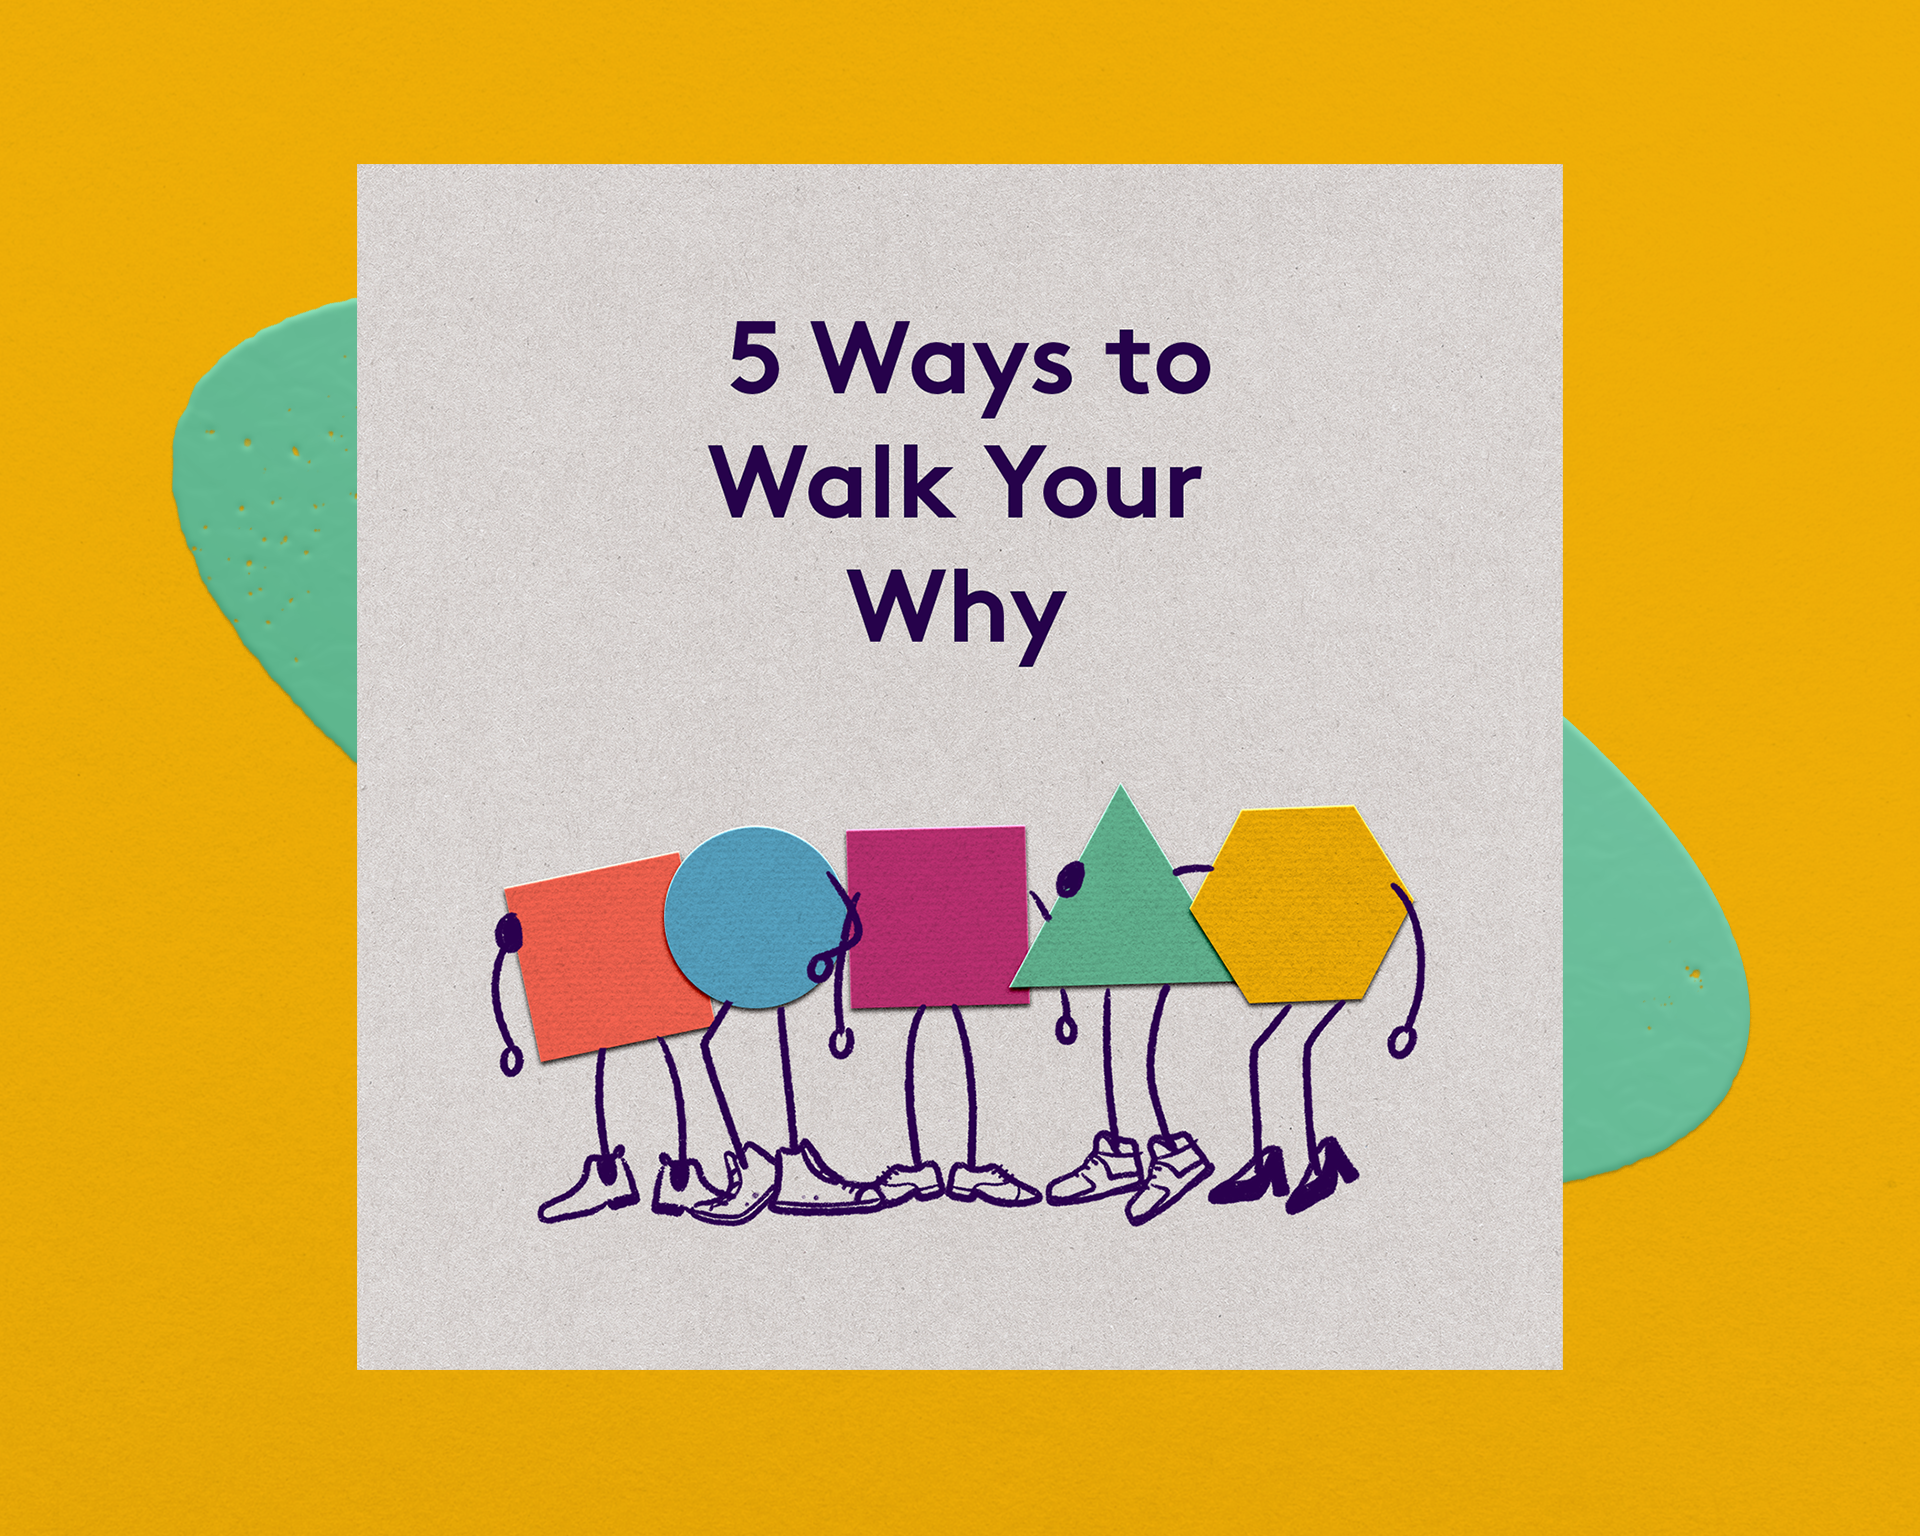 Group of colorful characters stand next to each other under 5 Ways to Walk Your Why